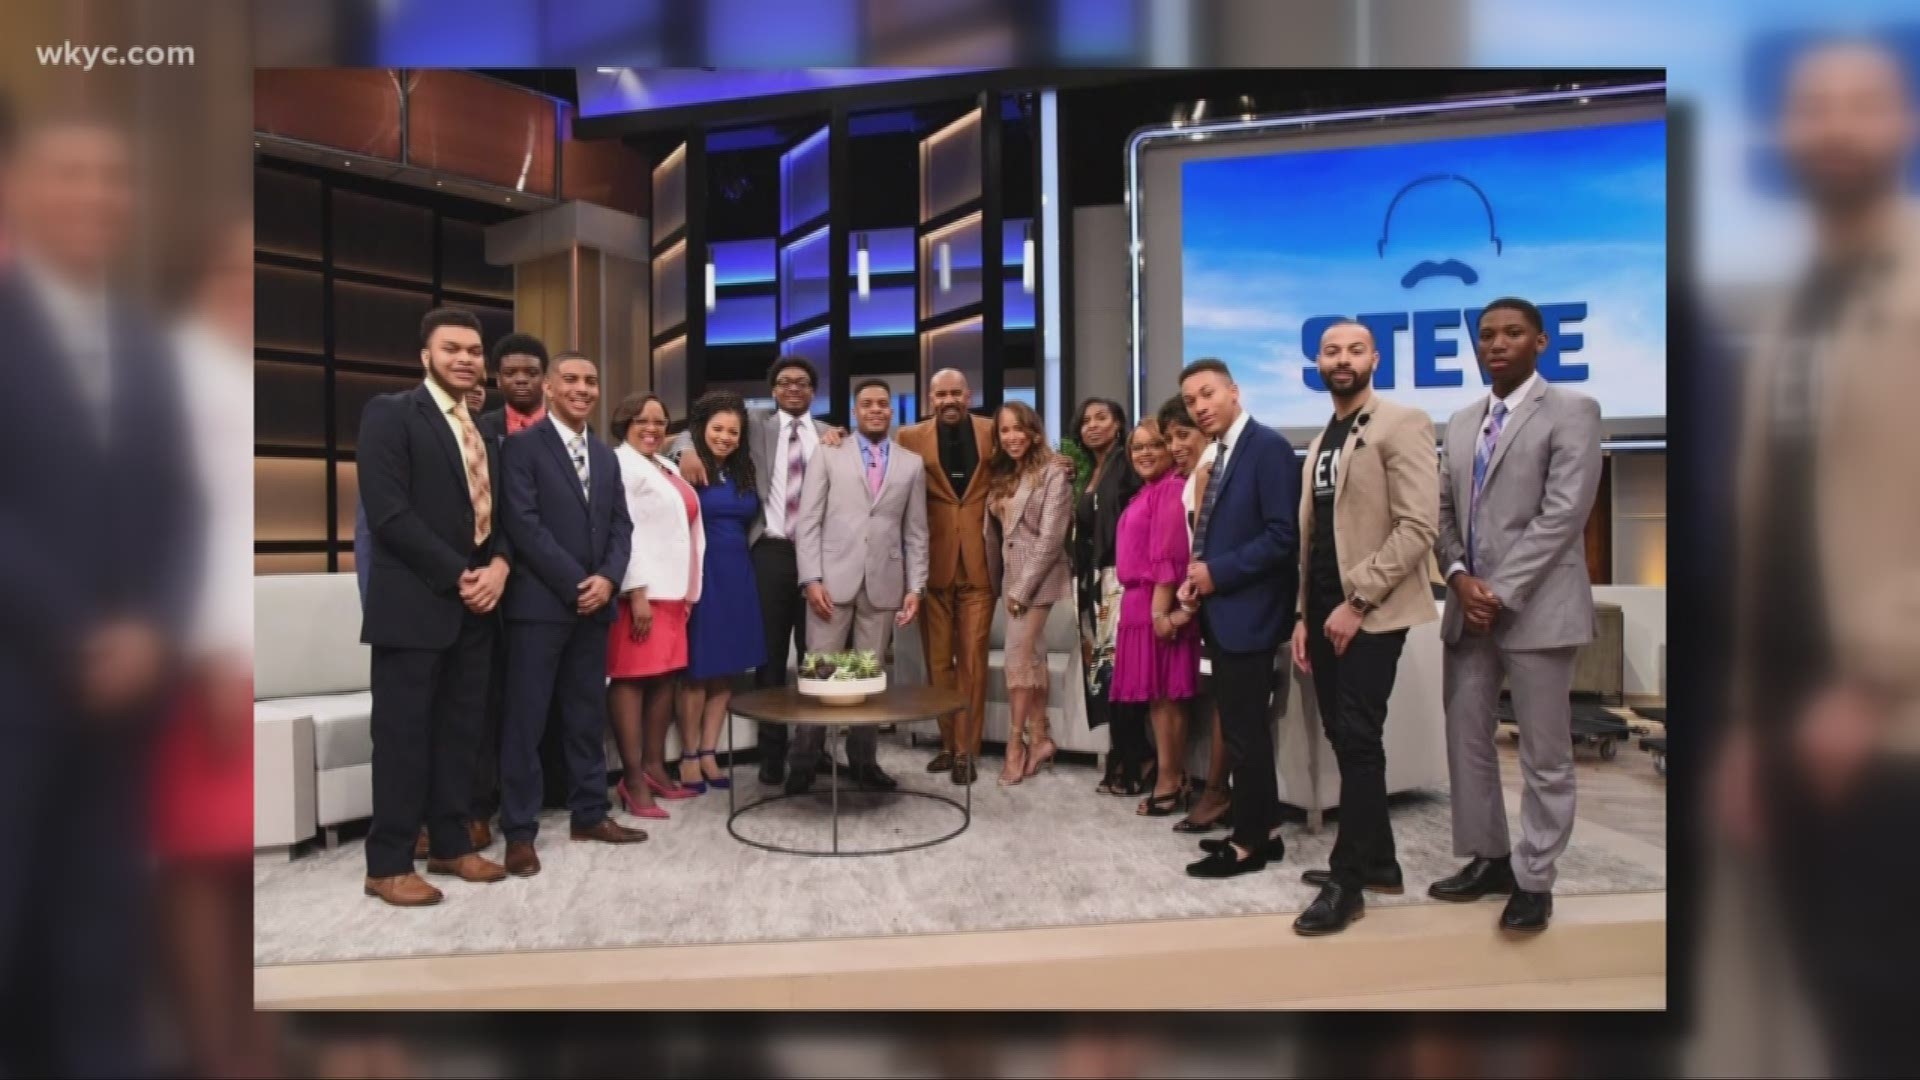 Steve Harvey awards 8 students scholarships to Kent State, where he was once a student. The scholarships will cover cost of attendance, or roughly $23,000 per student.